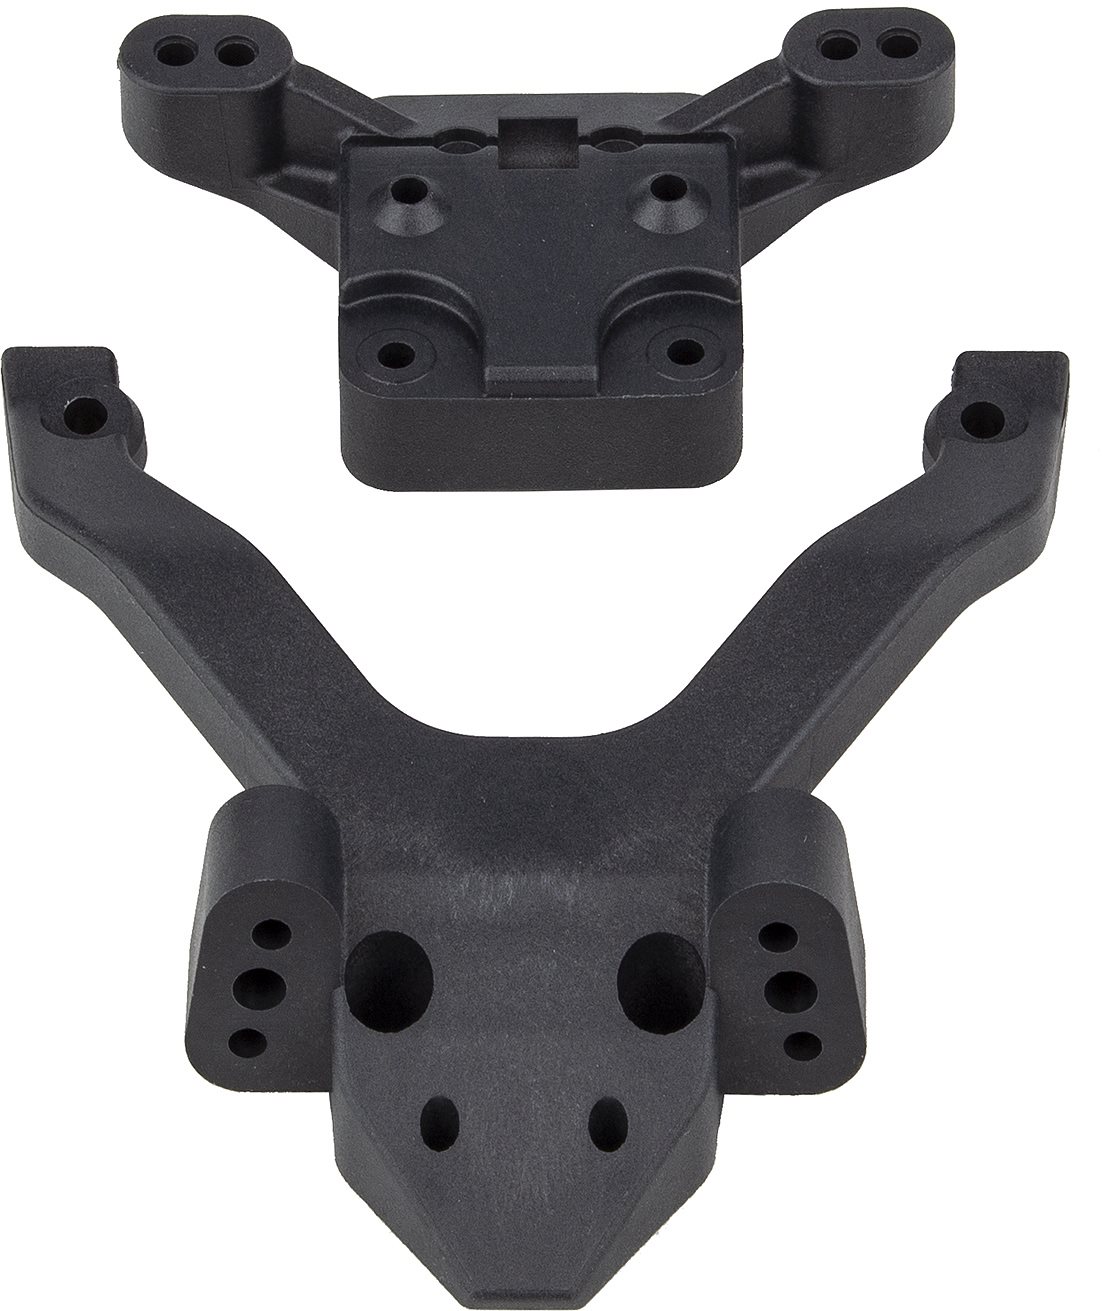 Associated Rc10b6.4 Factory Team Top Plate And Ballstud Mount, Carbon